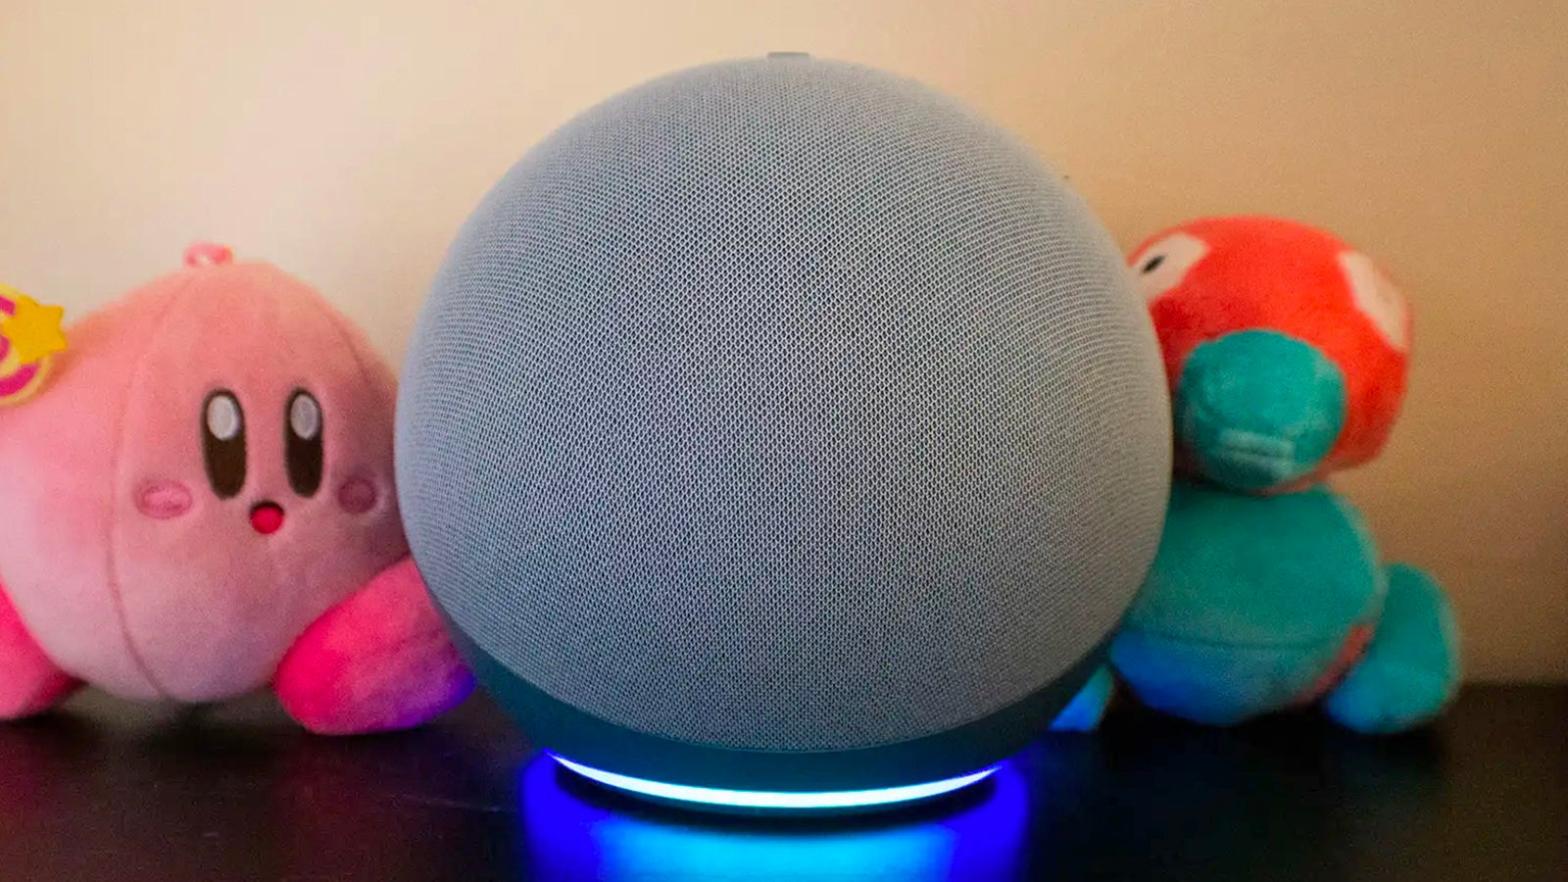 What is your smart speaker trying to tell you? (Photo: Victoria Song/Gizmodo)